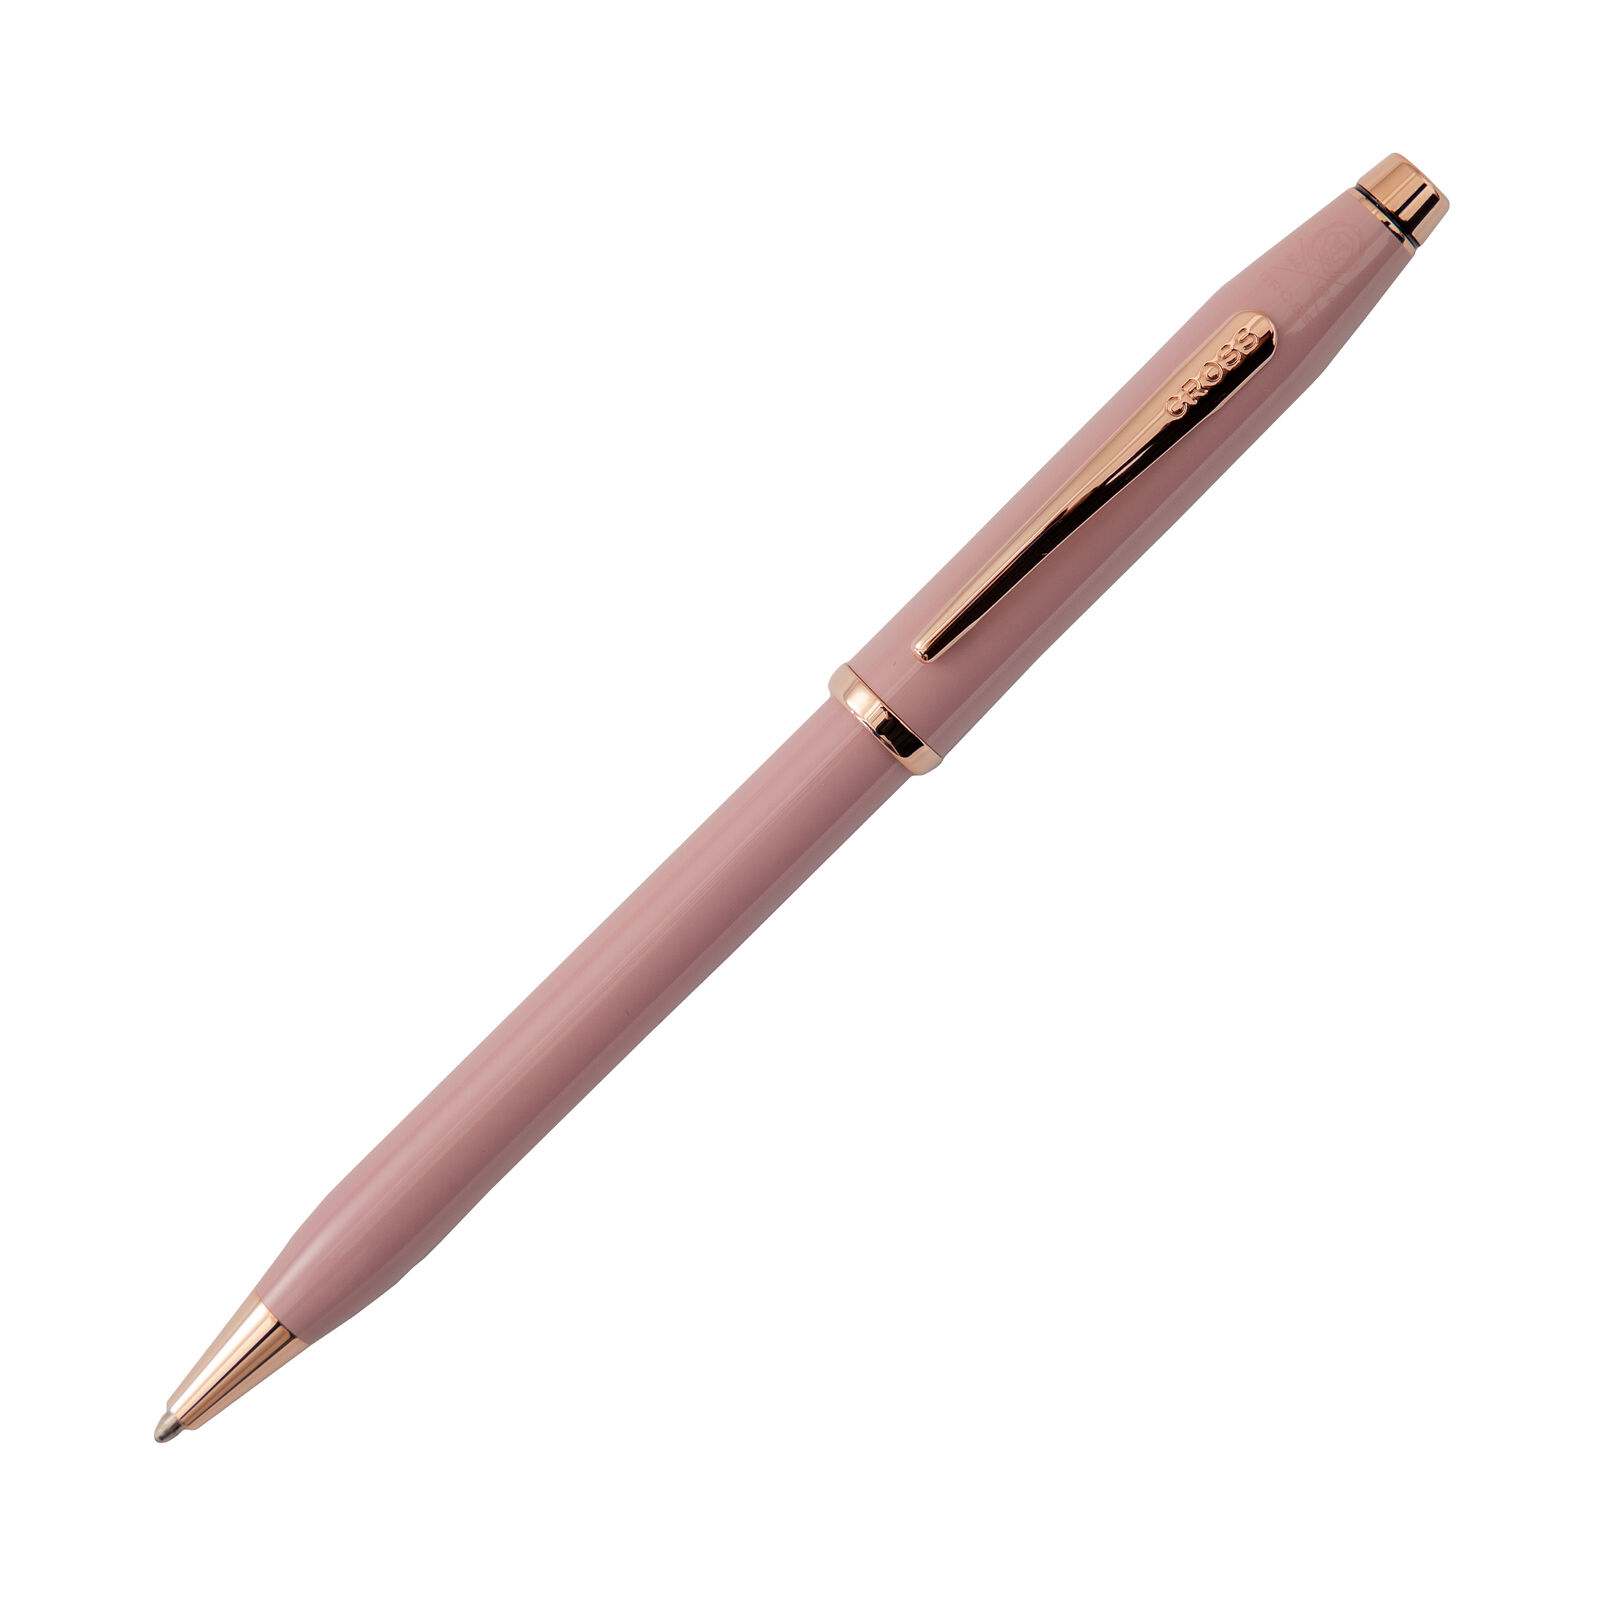 Cross Century II Ballpoint Pen in Smoky Pink Lacquer with Rose Gold Trim - NEW